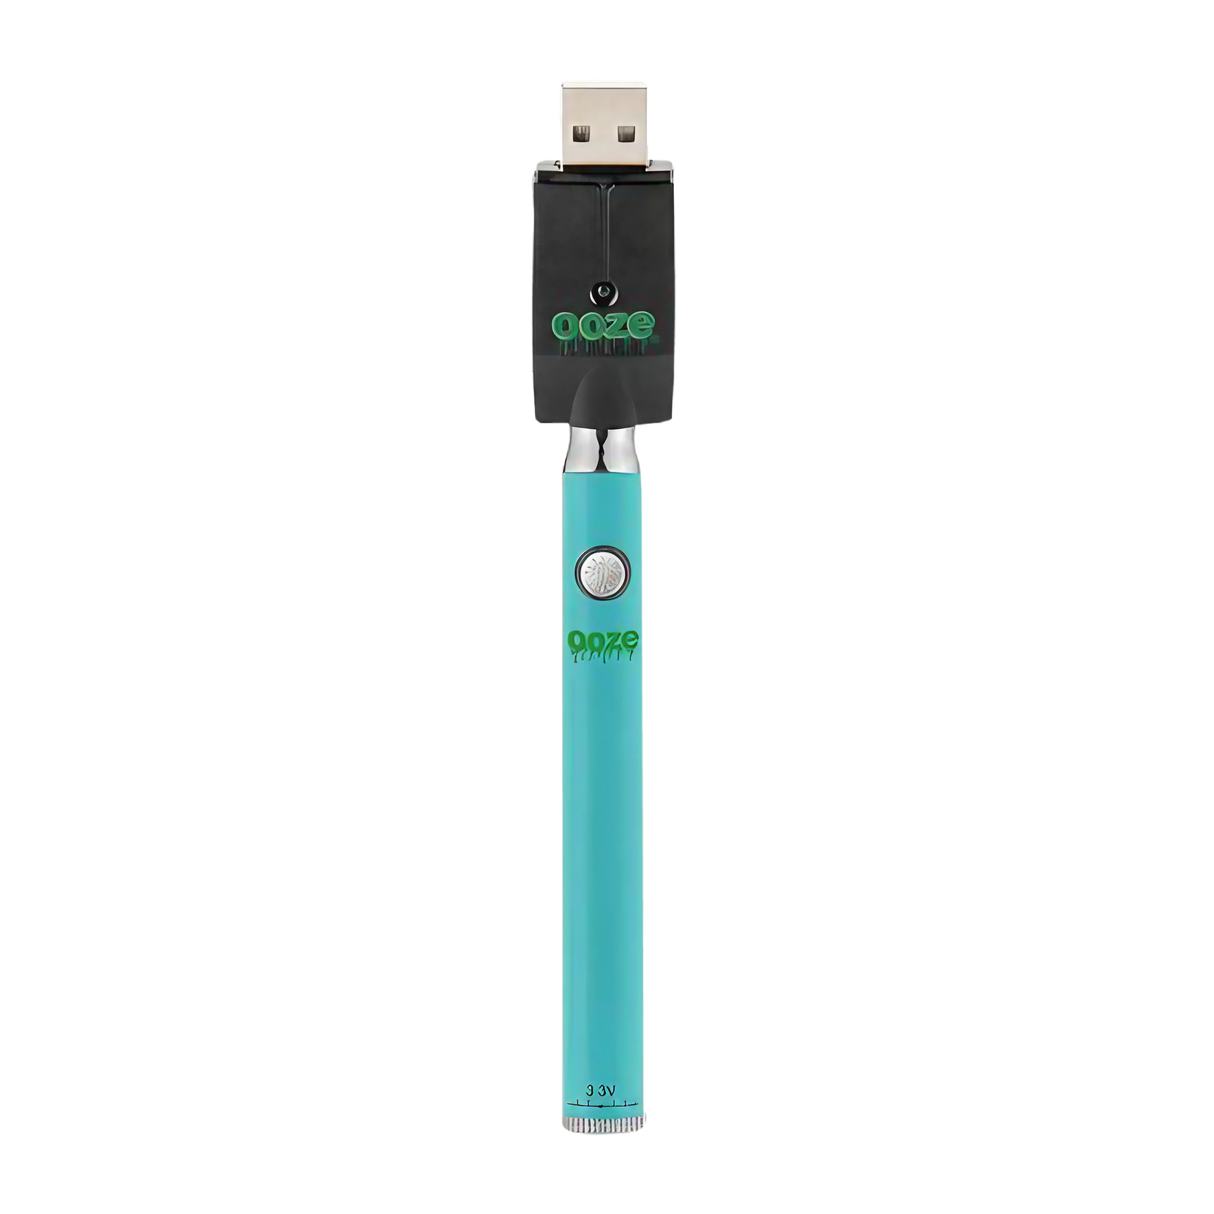 Ooze Slim Twist Vaporizer Battery with USB Charger in Aqua, 510 Thread, Front View